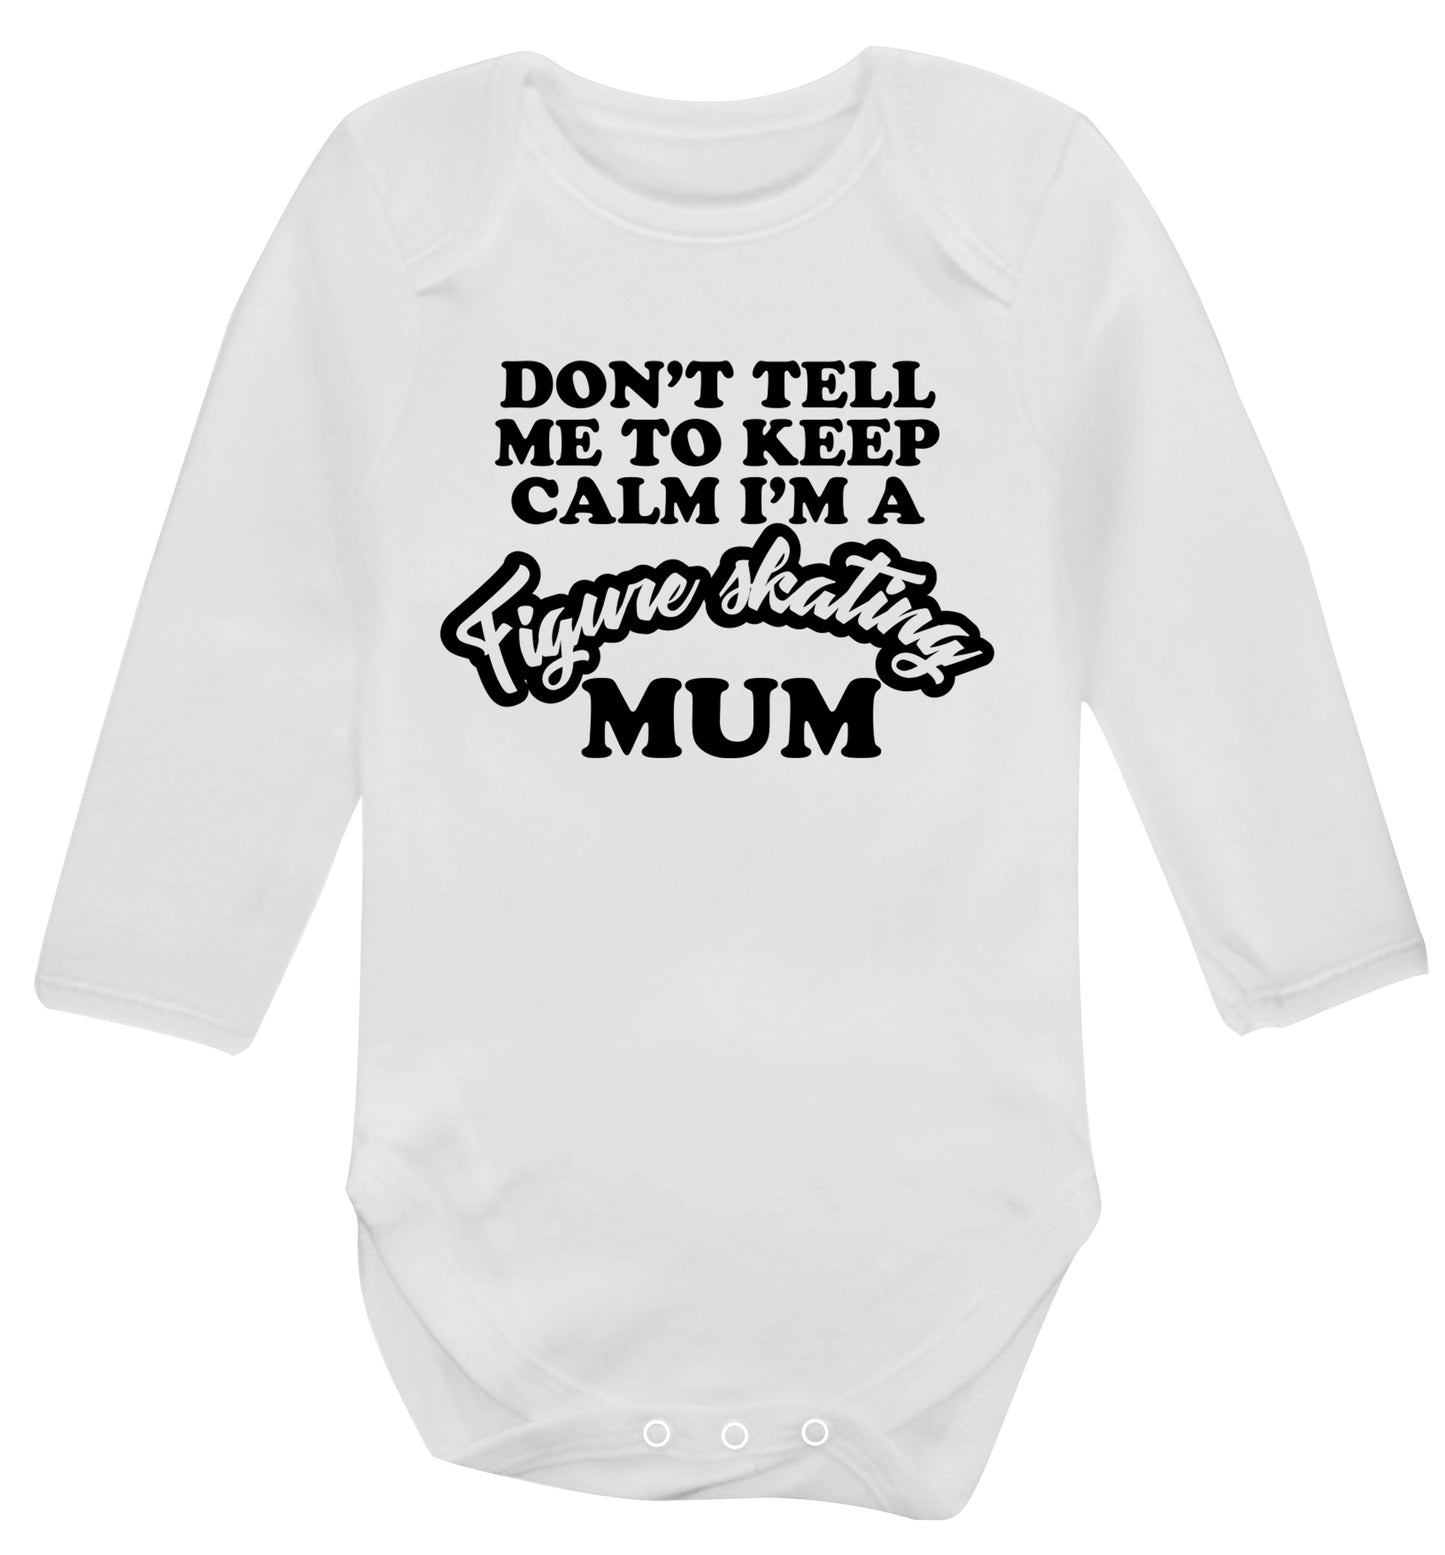 Don't tell me to keep calm I'm a figure skating mum Baby Vest long sleeved white 6-12 months